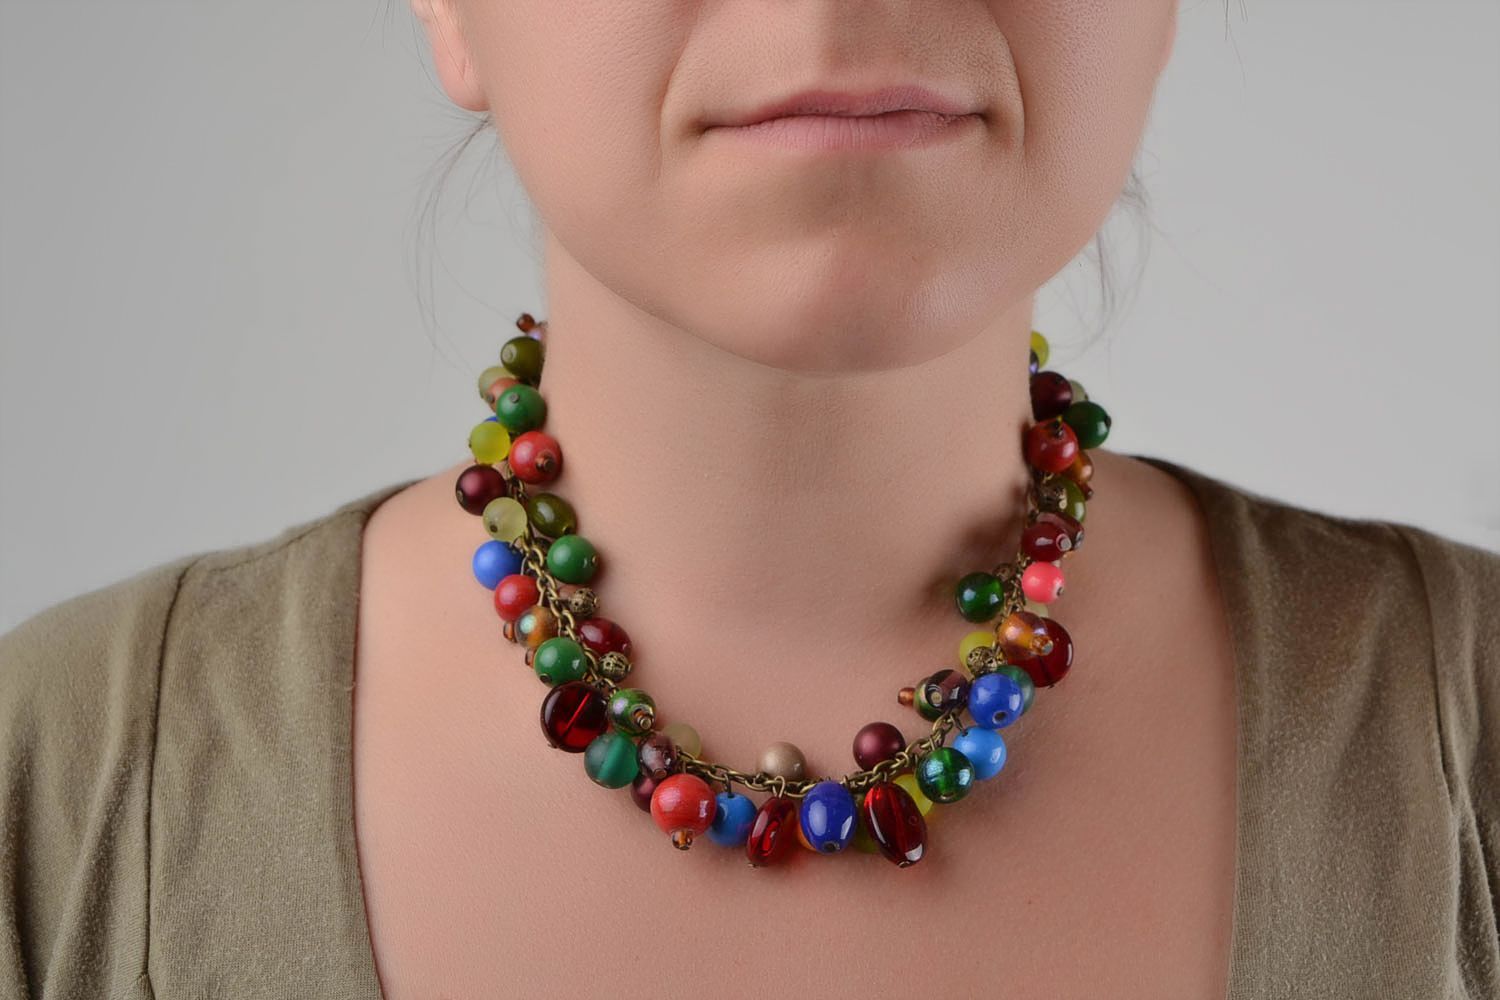 Handmade metal chain designer necklace with colorful glass beads for women photo 2